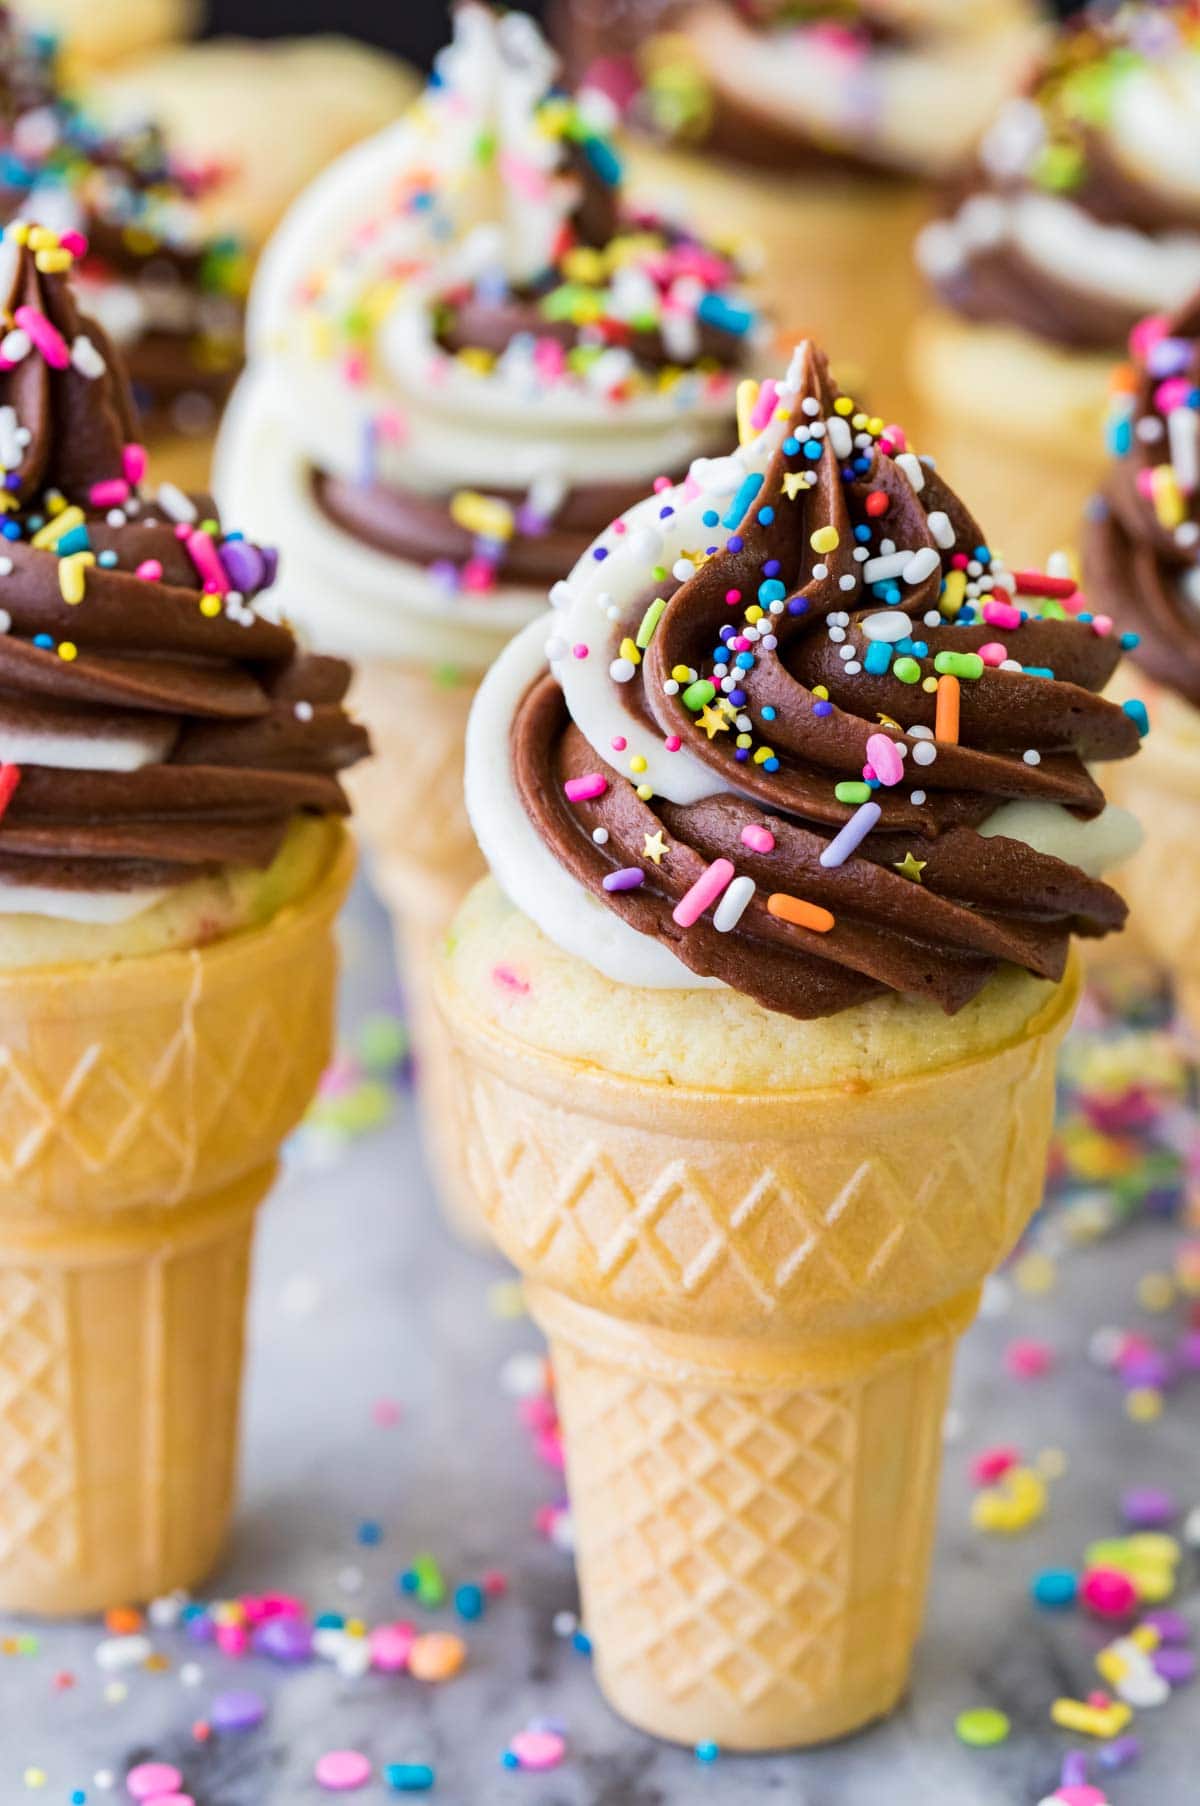 Ice cream cone cupcakes topped with a chocolate vanilla frosting swirl and sprinkles.